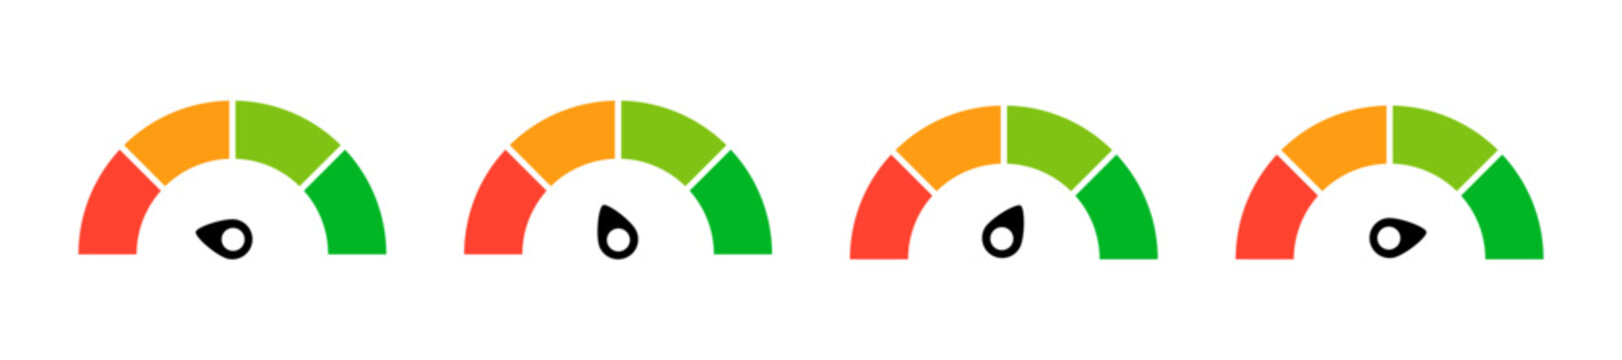 Speedometer vector icon. Scale speed in flat style. Vector speedometer illustration. Speed indicator, Risk level guage